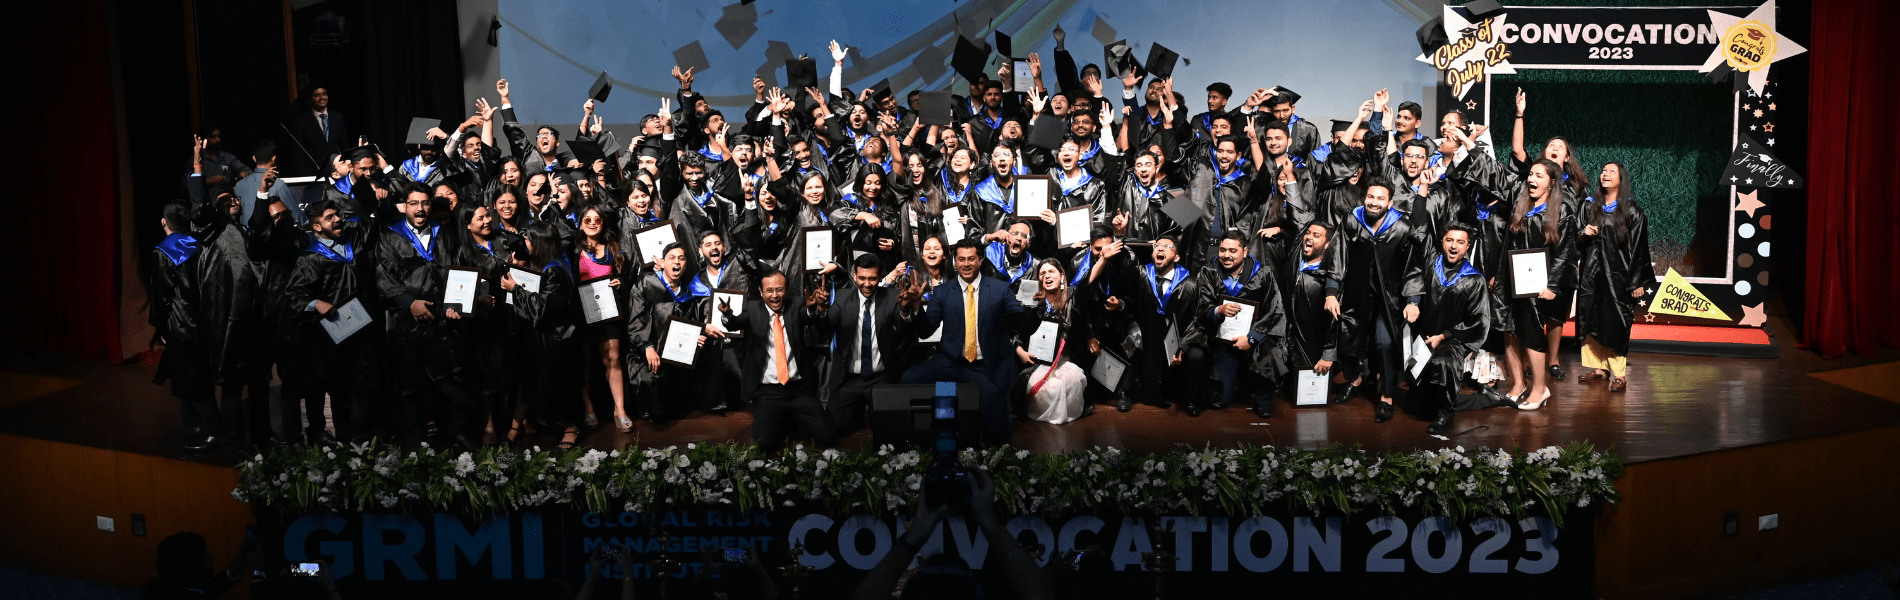 GRMI Welcome to convocation 2023 (1900 × 600 px)